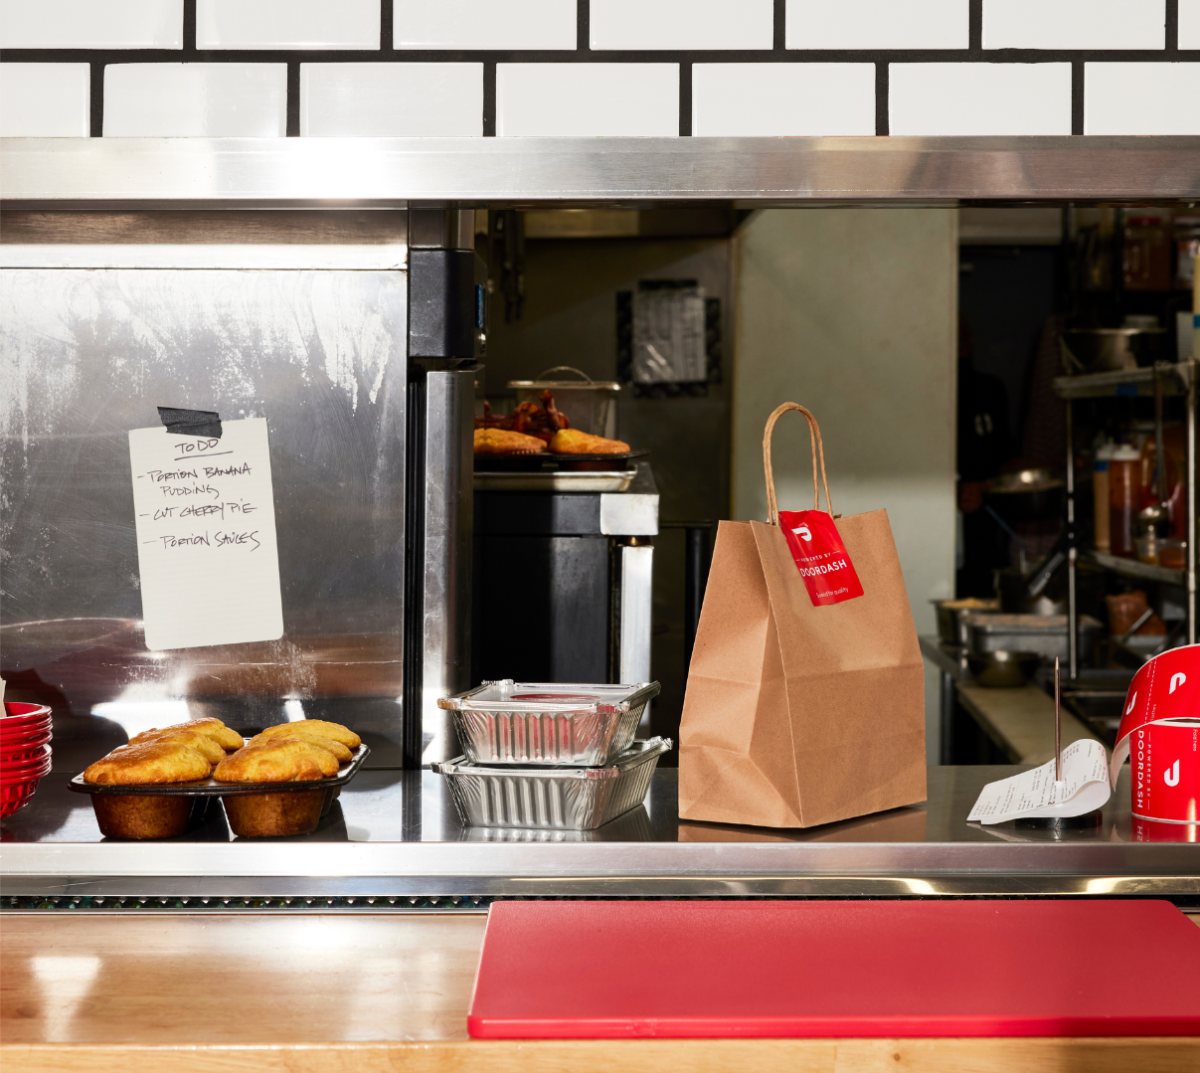 Counter at a restaurant with orders ready for dine-in and pickup with DoorDash